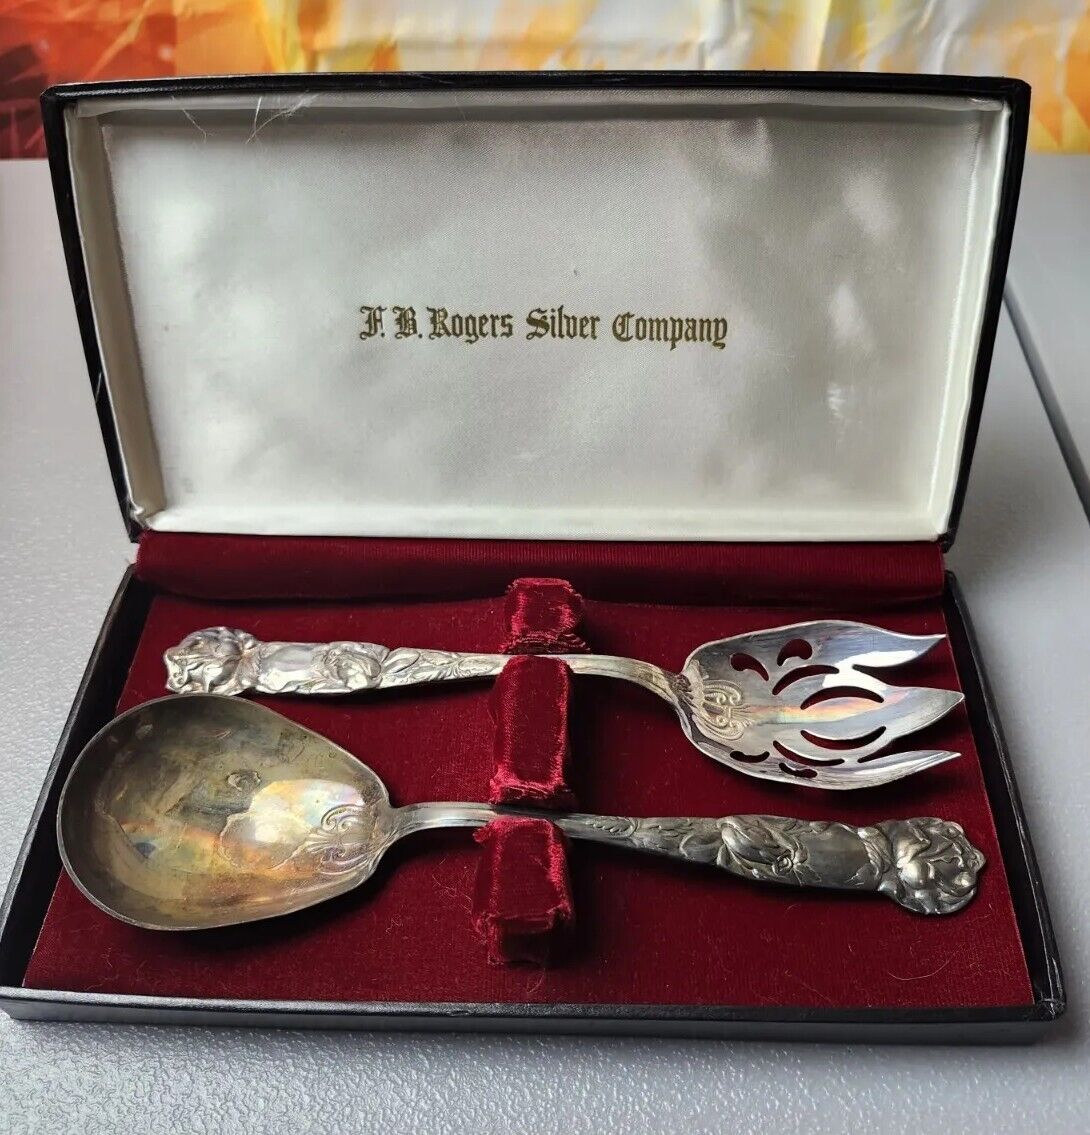 F.B. Rogers Silver Co. Serving Spoon Fork Renaissance Period Made In Italy Box